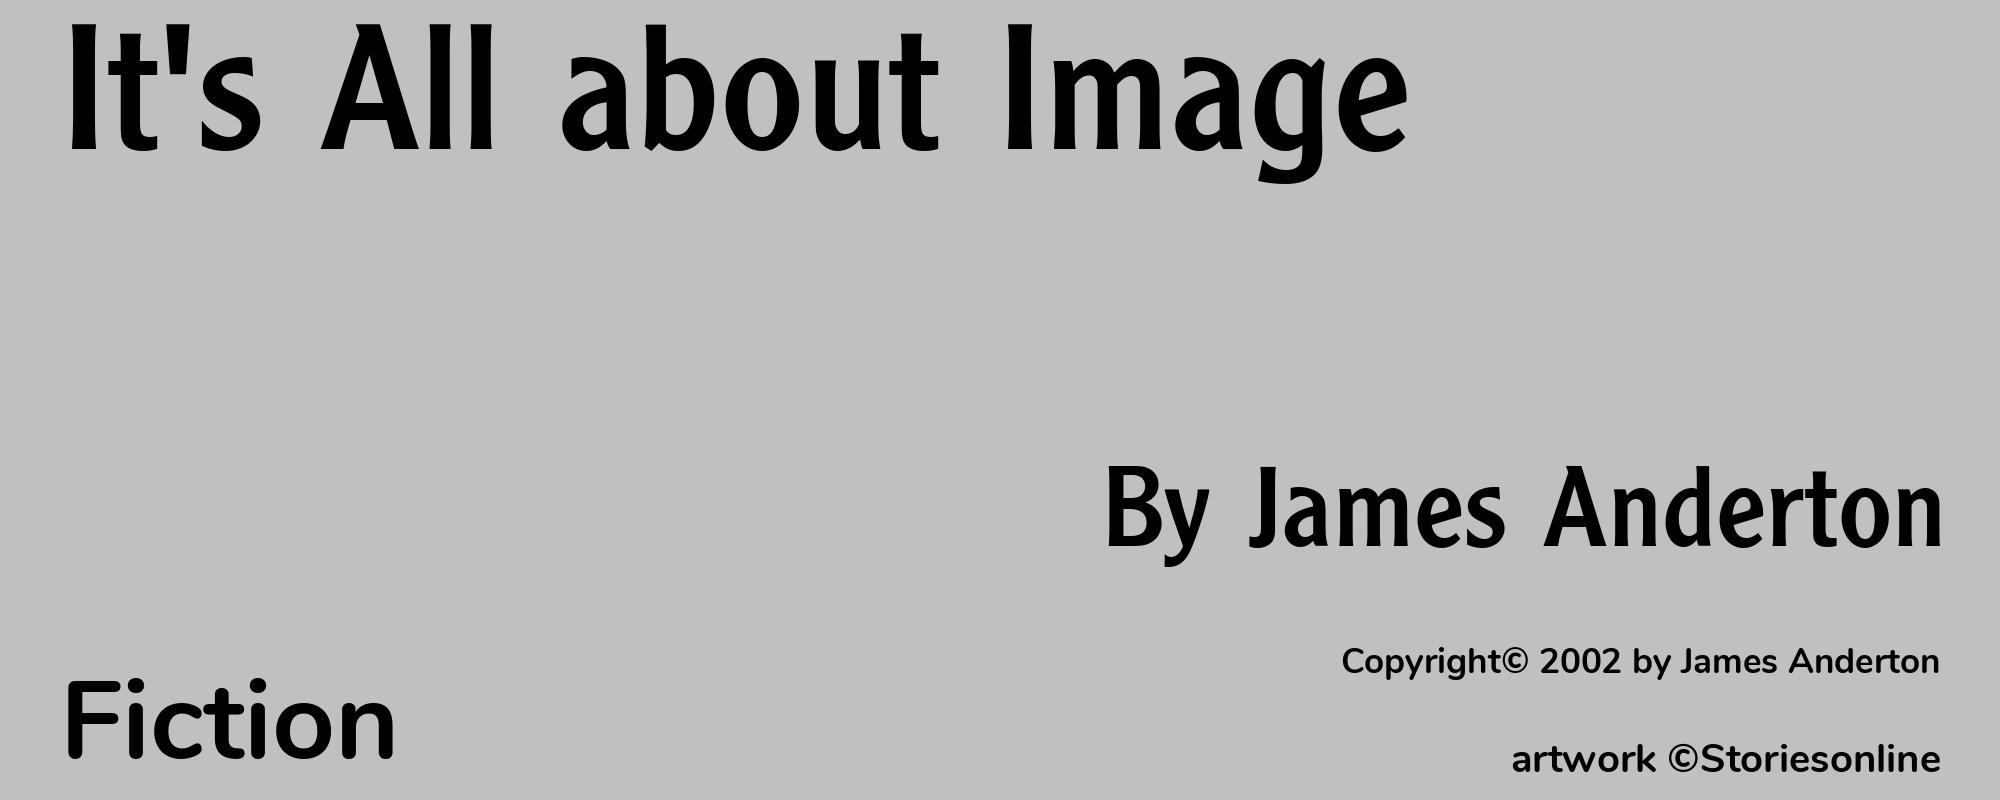 It's All about Image - Cover